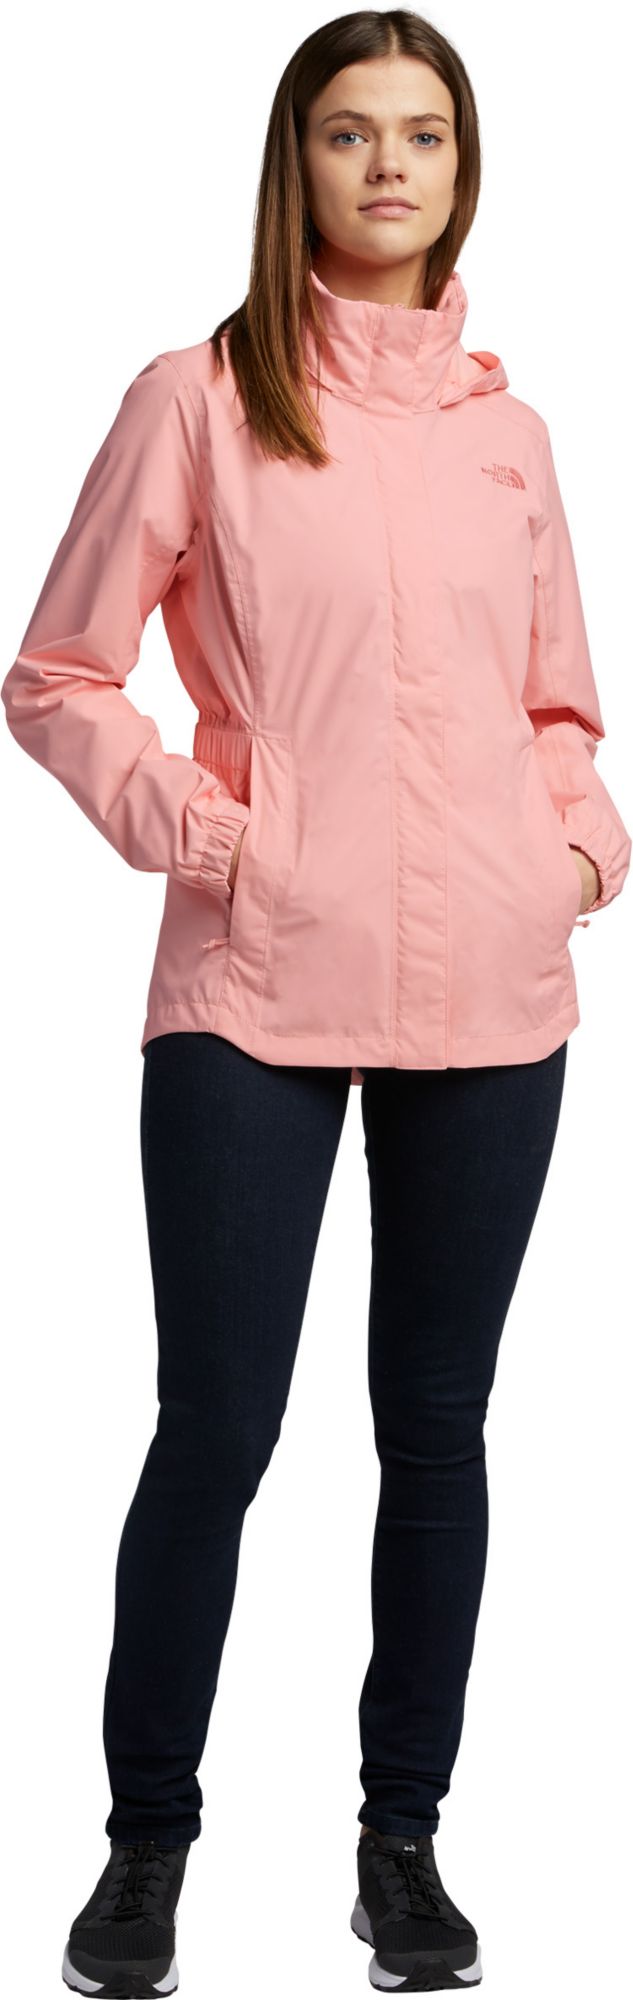 The North Face Women's Resolve II Parka 